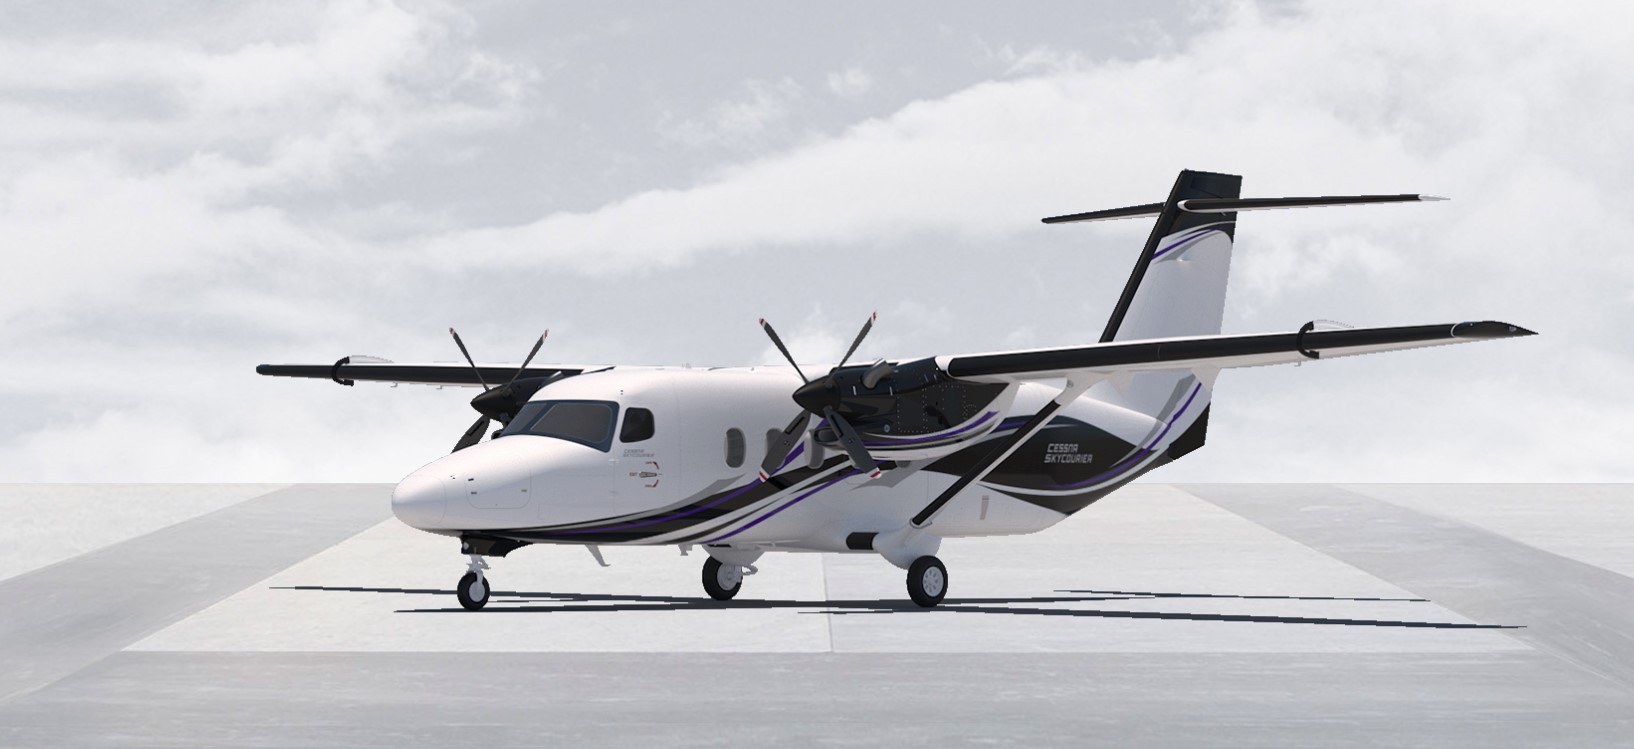 Image of the Cessna SkyCourier designed and manufactured by © Textron Aviation